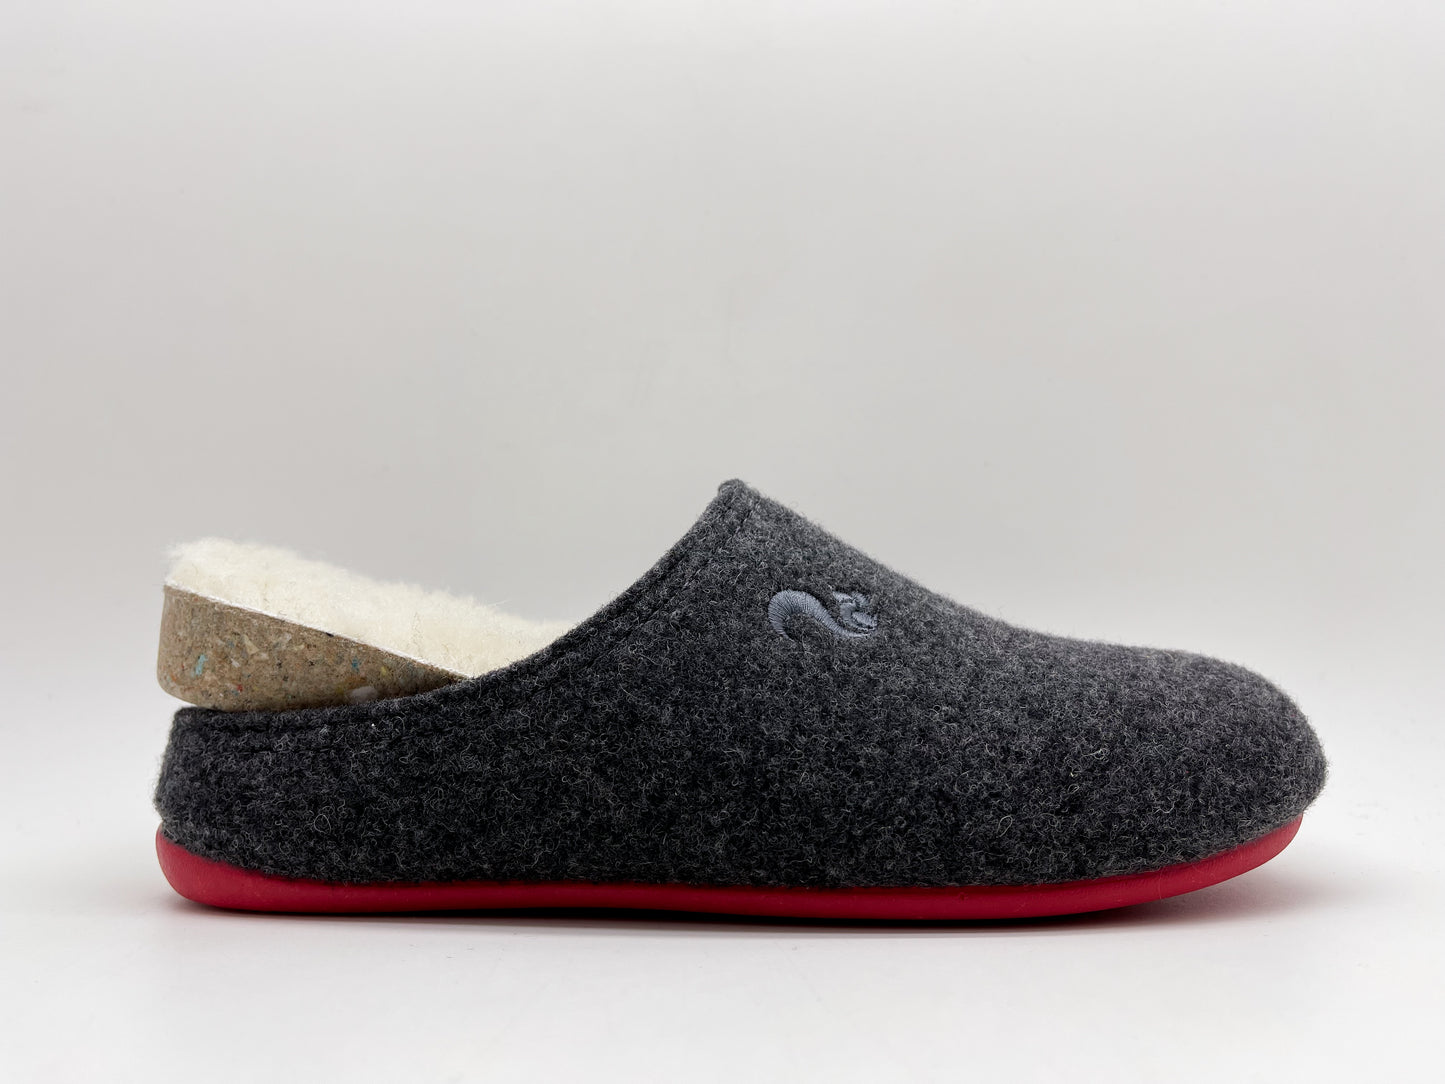 thies 1856 ® Recycled Wool Slippers dark grey red (W)